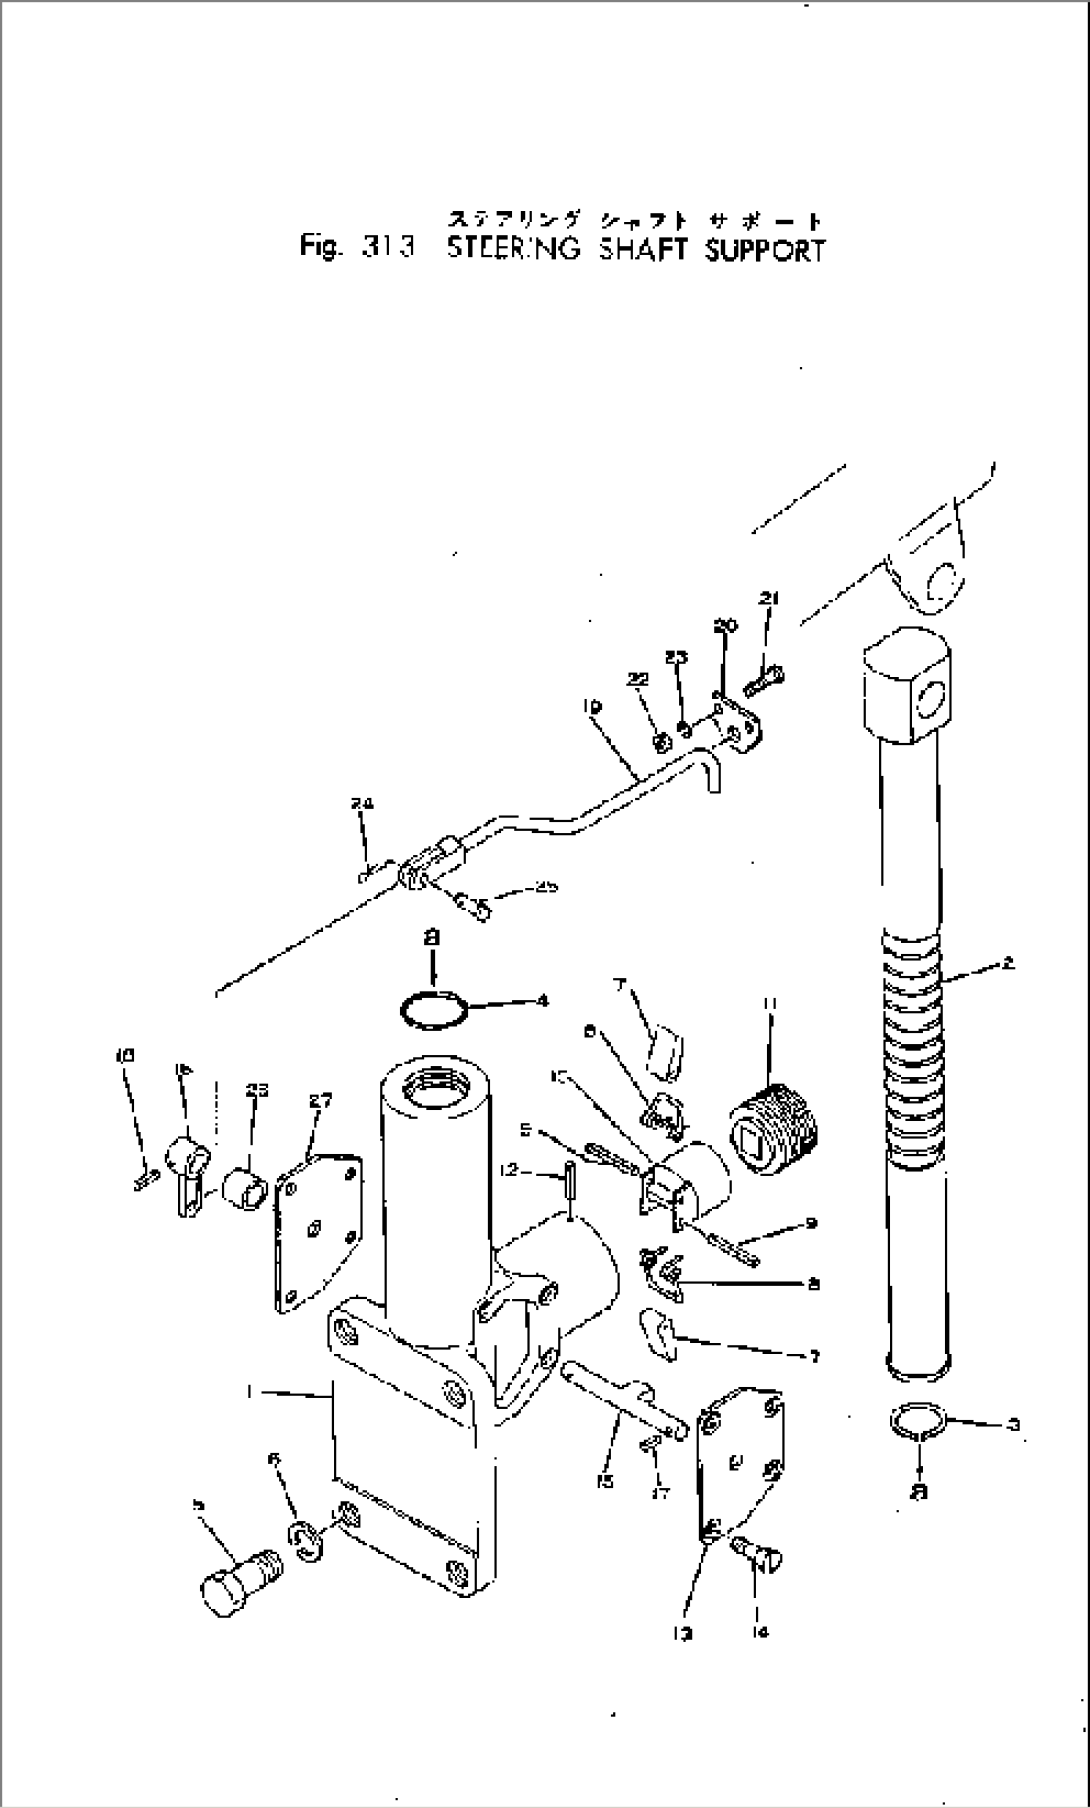 STEERING SHAFT SUPPORT